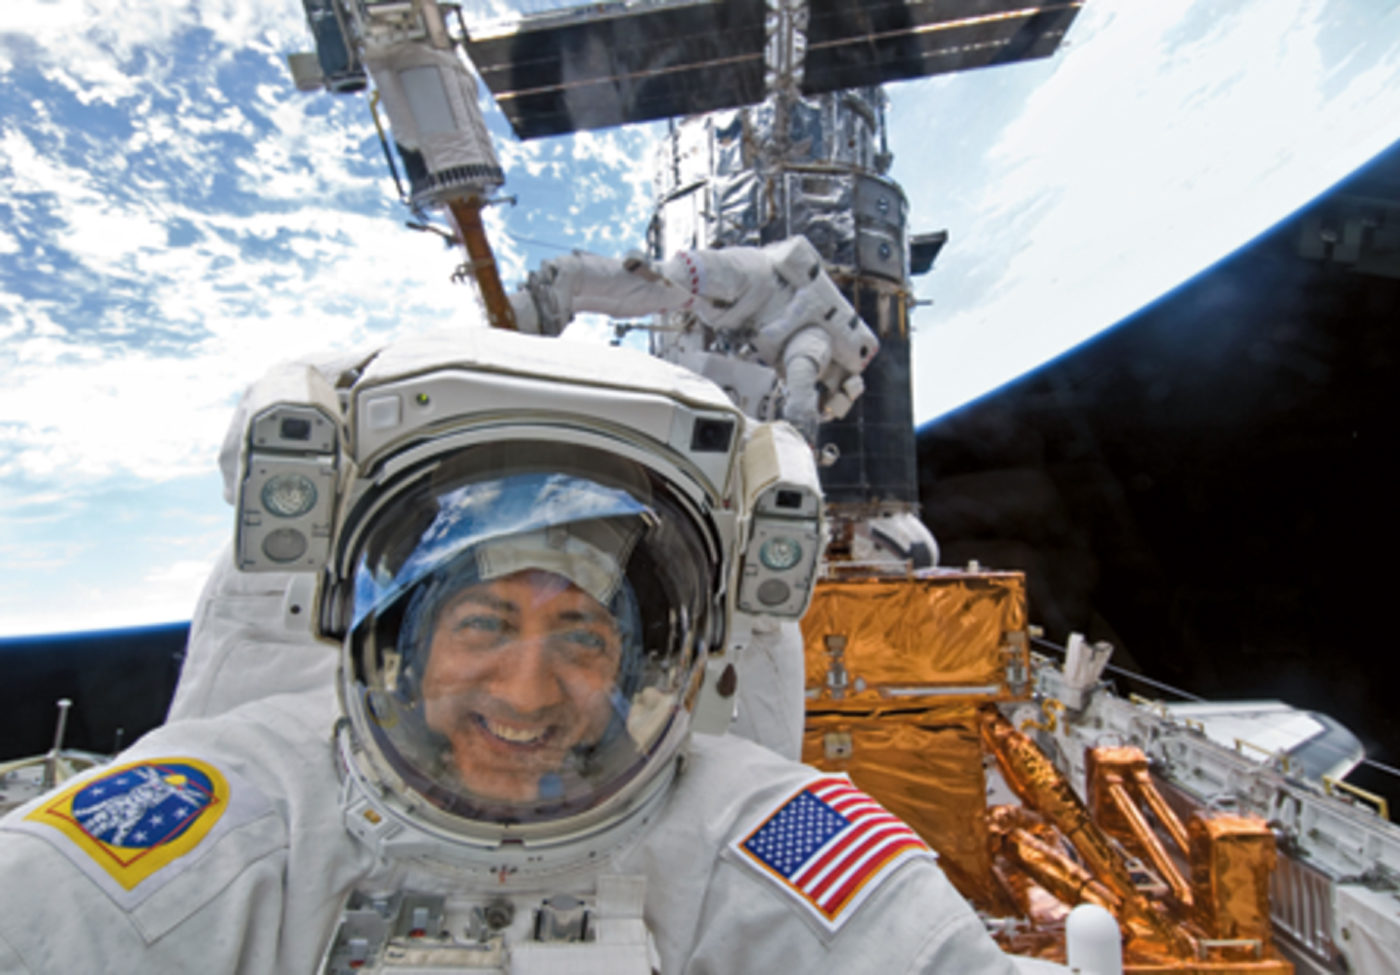 NASA photo of Astronaut Mike Massimino smiles for the camera during STS-125, the last Hubble Servicing mission in May 2009.